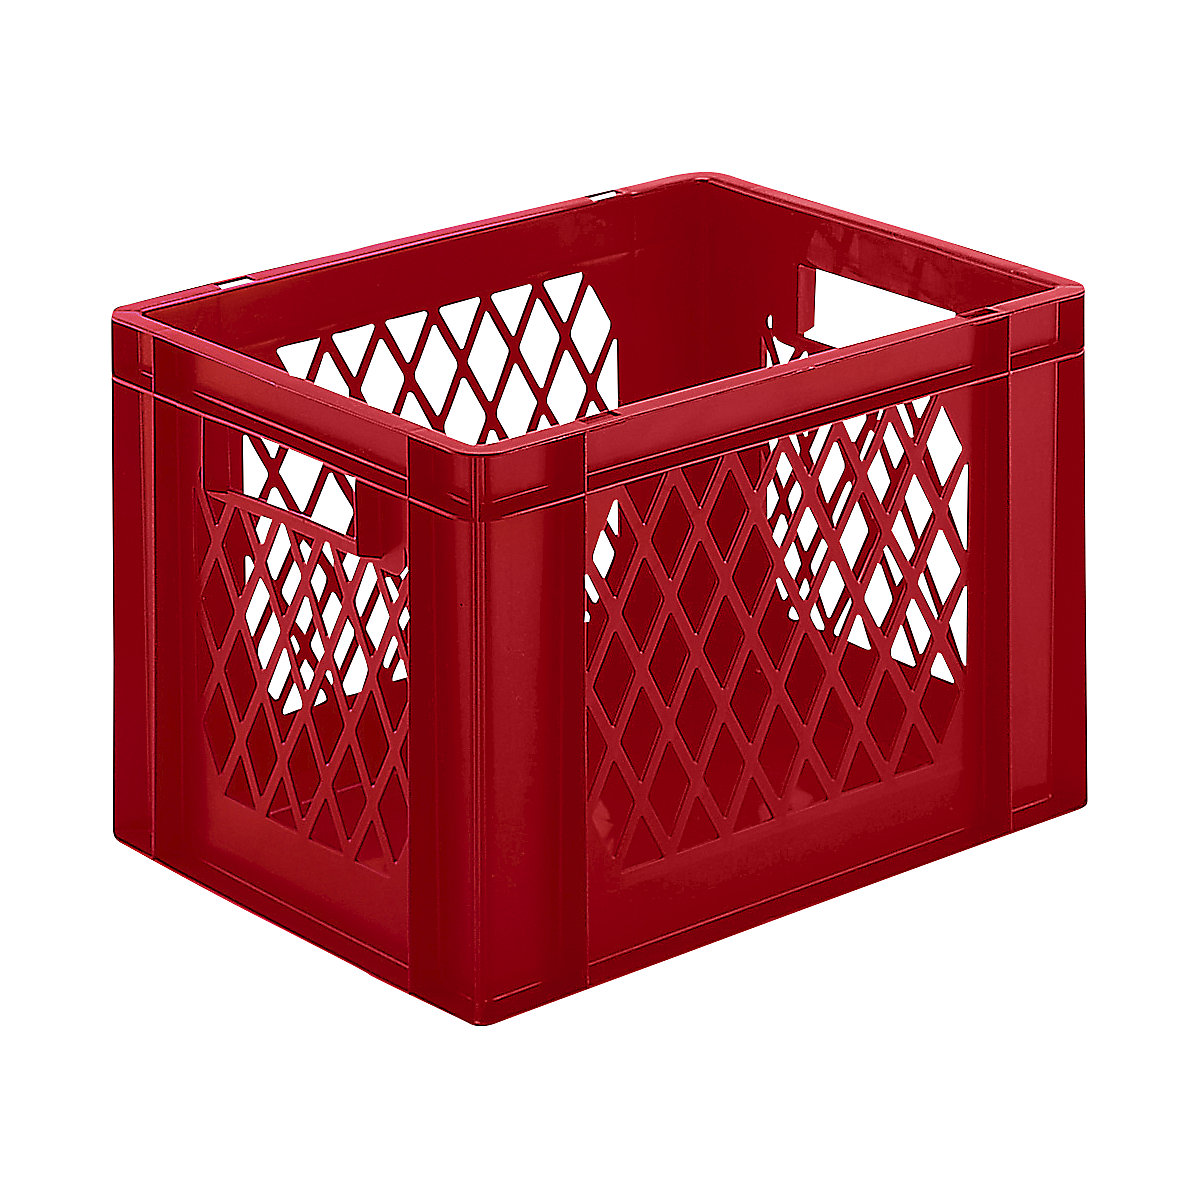 Euro stacking container, perforated walls, closed base, LxWxH 400 x 300 x 266 mm, red, pack of 5-7